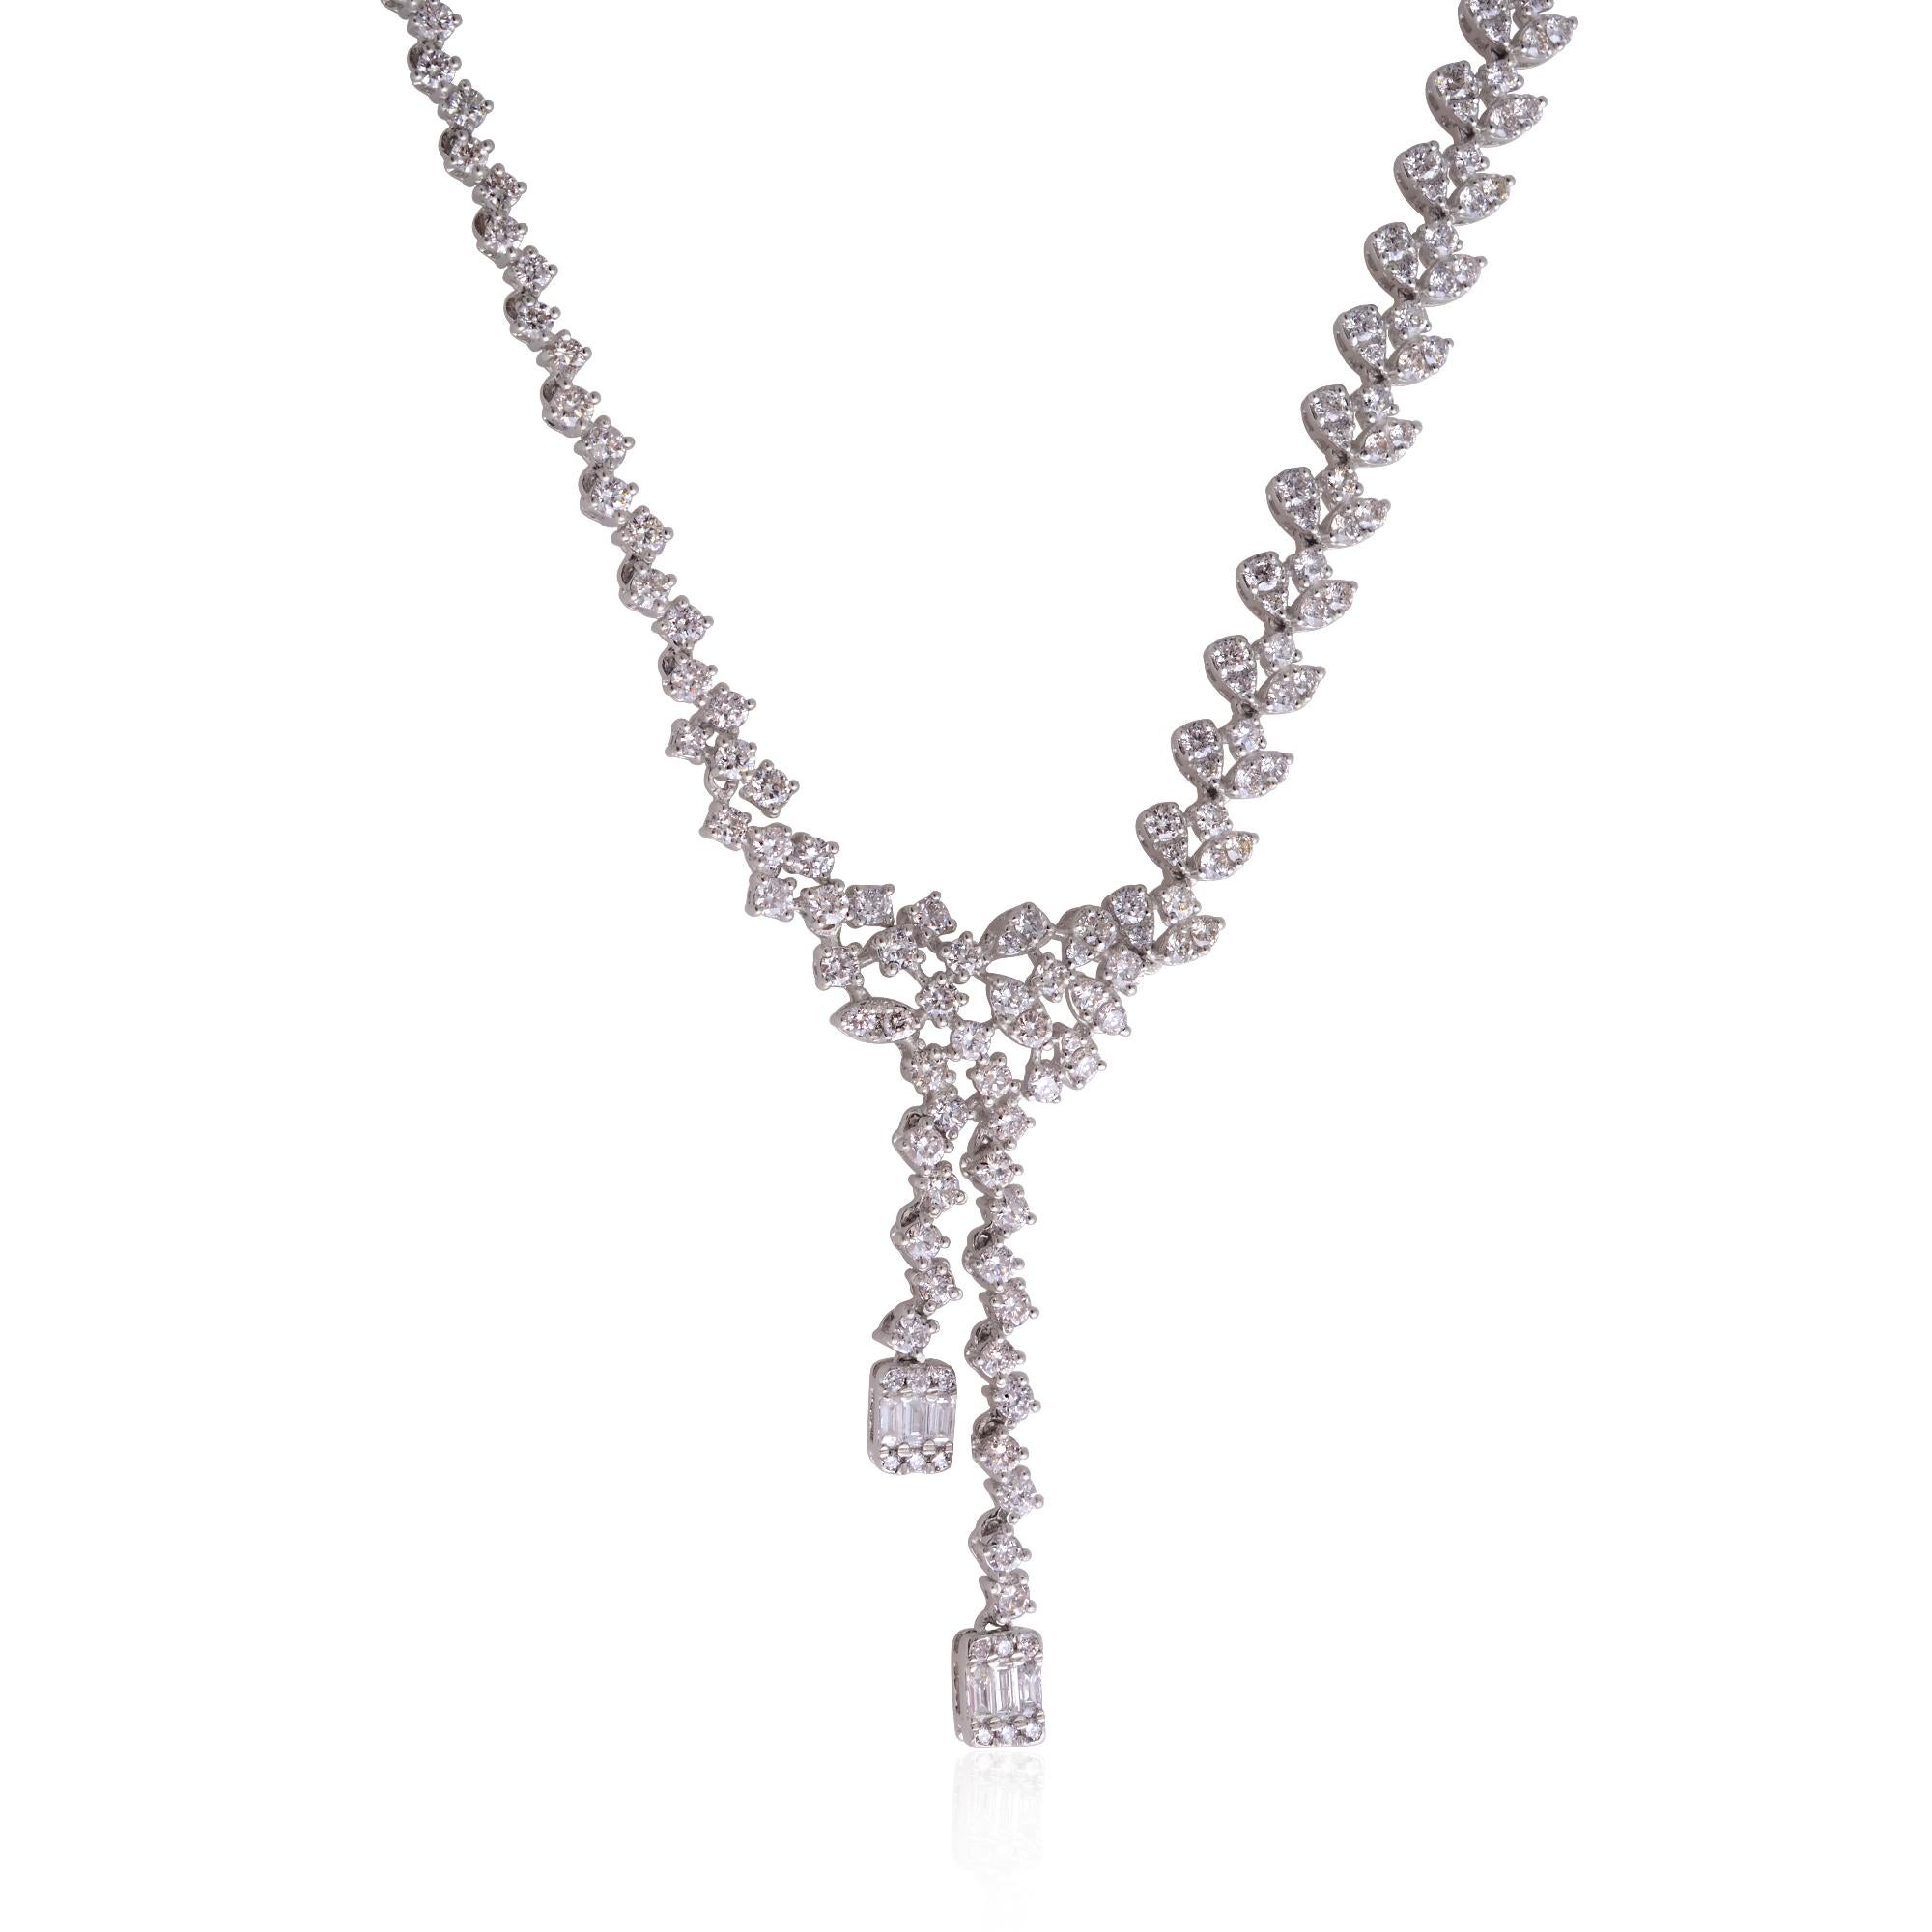 The baguette diamonds are expertly set in a lariat-style necklace, which adds a touch of versatility and modernity to the design. The lariat style features a Y-shaped drop, with one end of the chain passing through the other, allowing the necklace